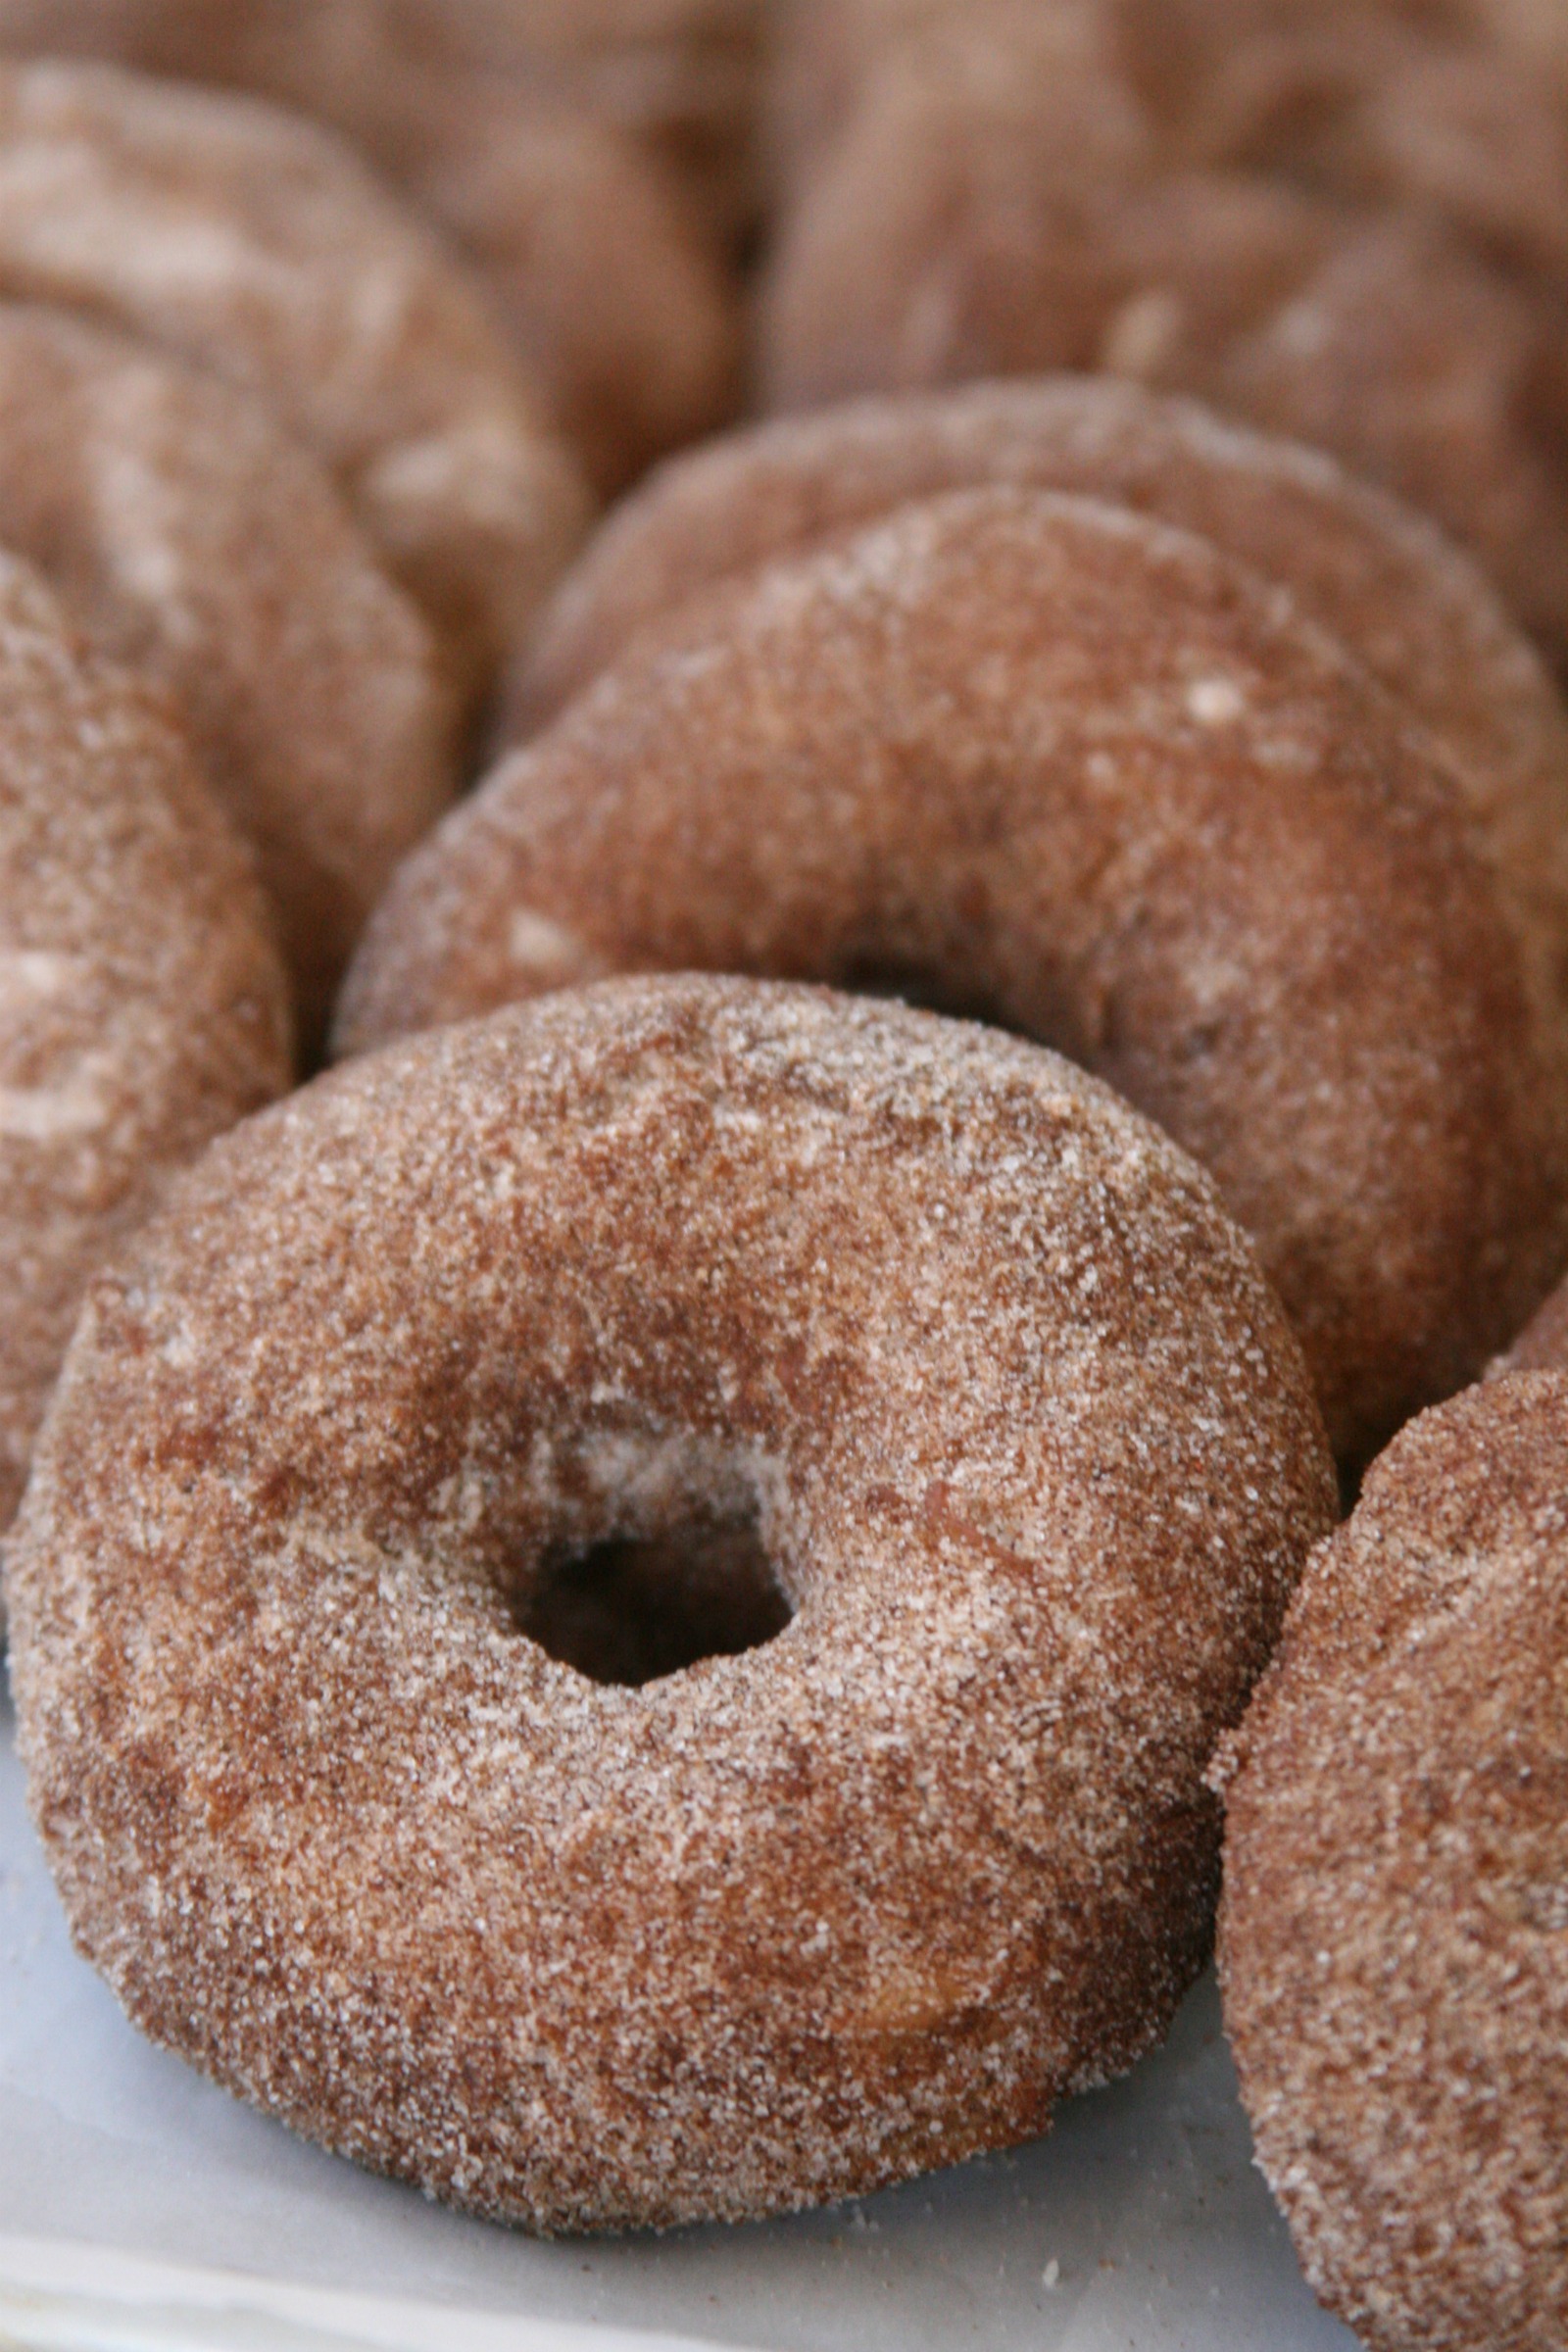 Apple Cider donuts sprinkled with cinnamon sugar mixture lined up against each other on parchment paper